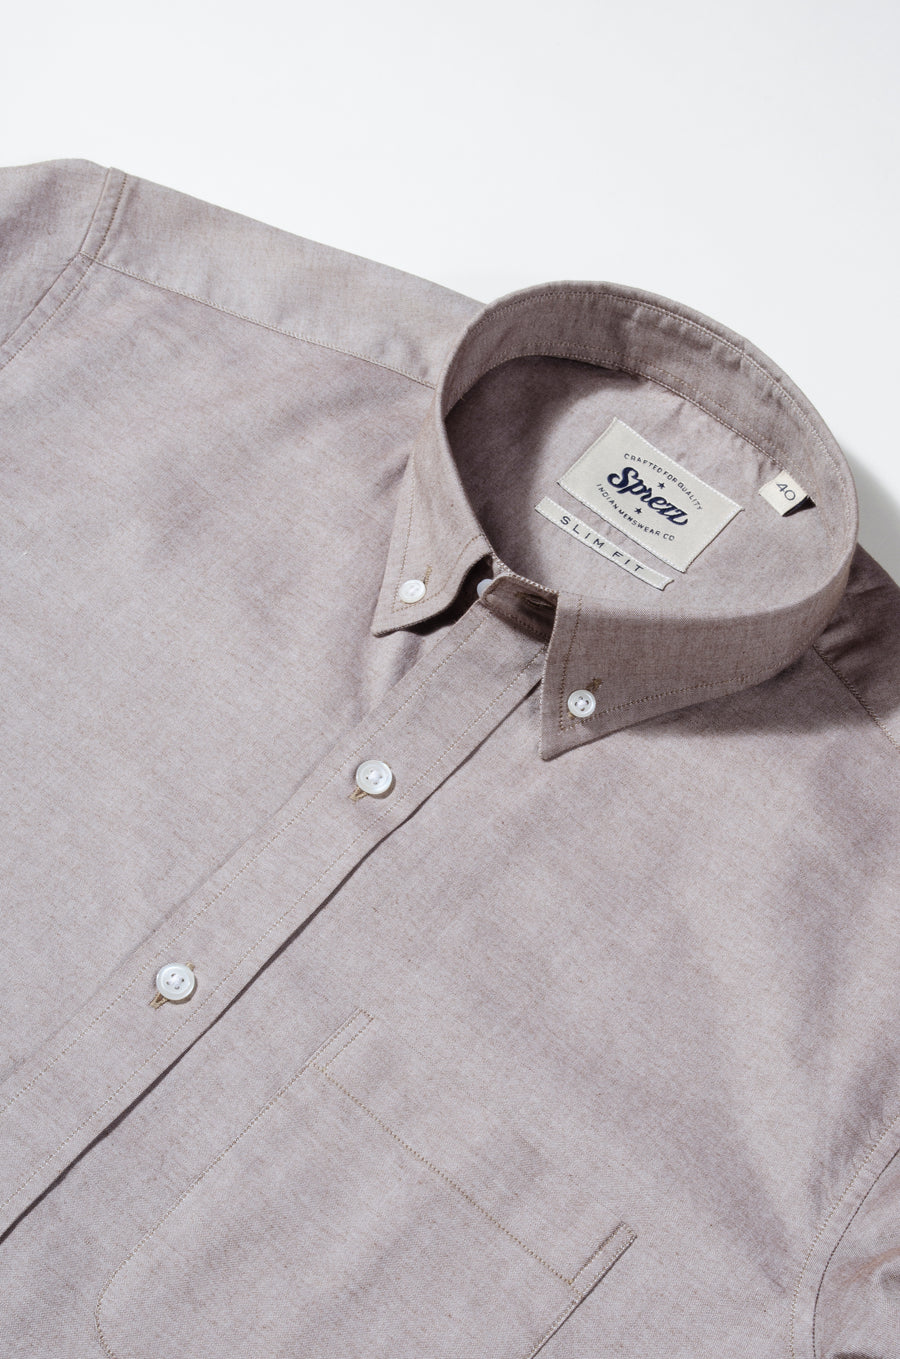 Dusty Brown Chambray Button Down Slim Fit Shirt